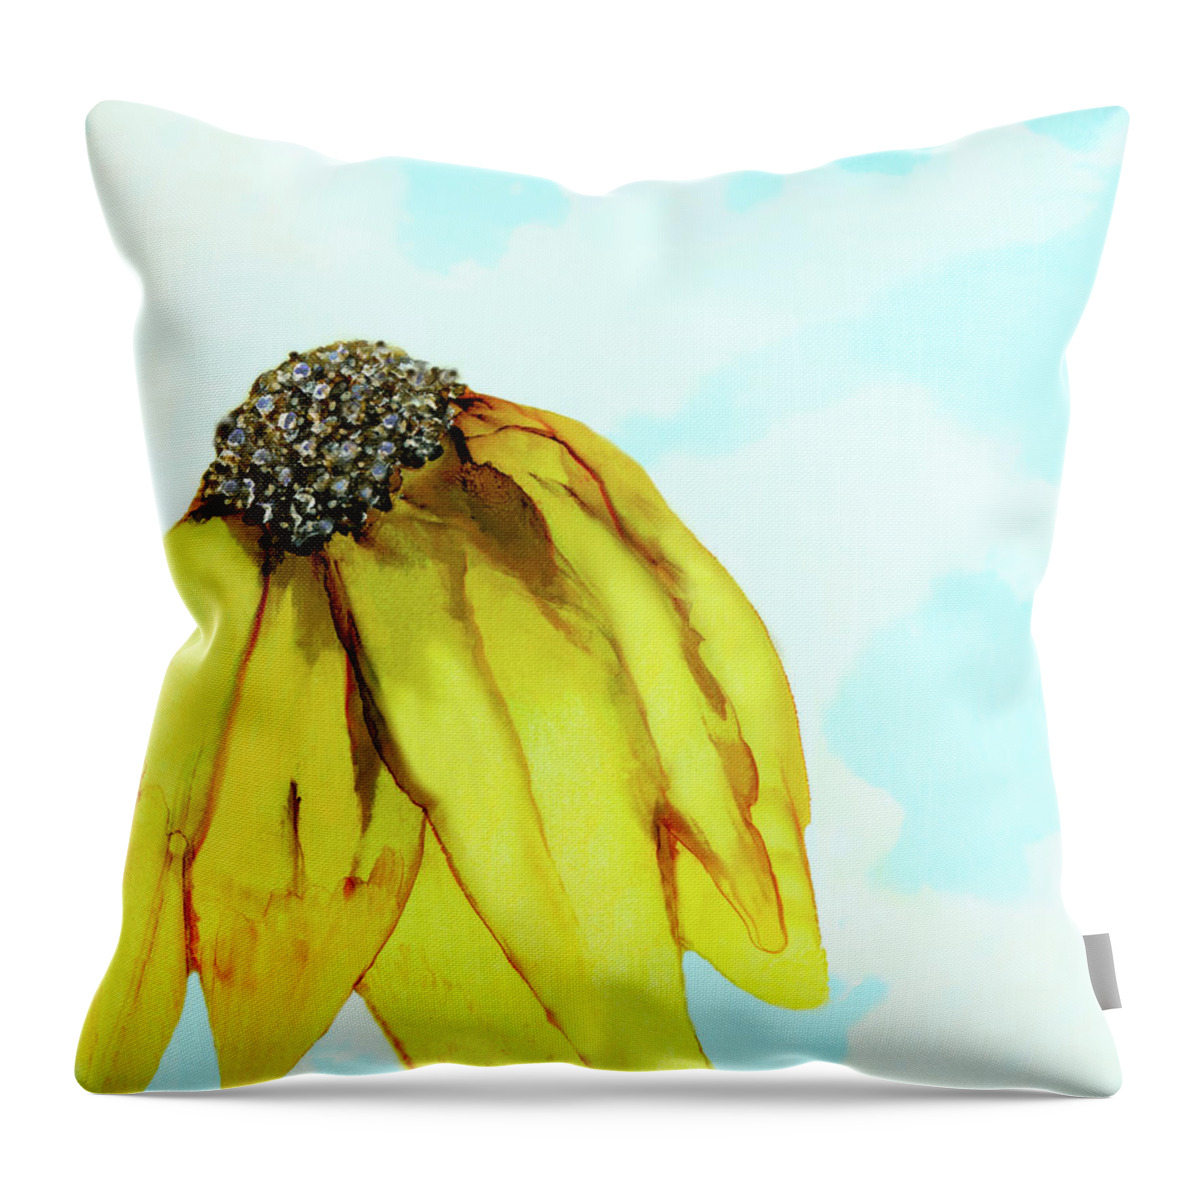 Sunflower Throw Pillow featuring the painting Yellow Sunflower Against A Blue Sky by Deborah League